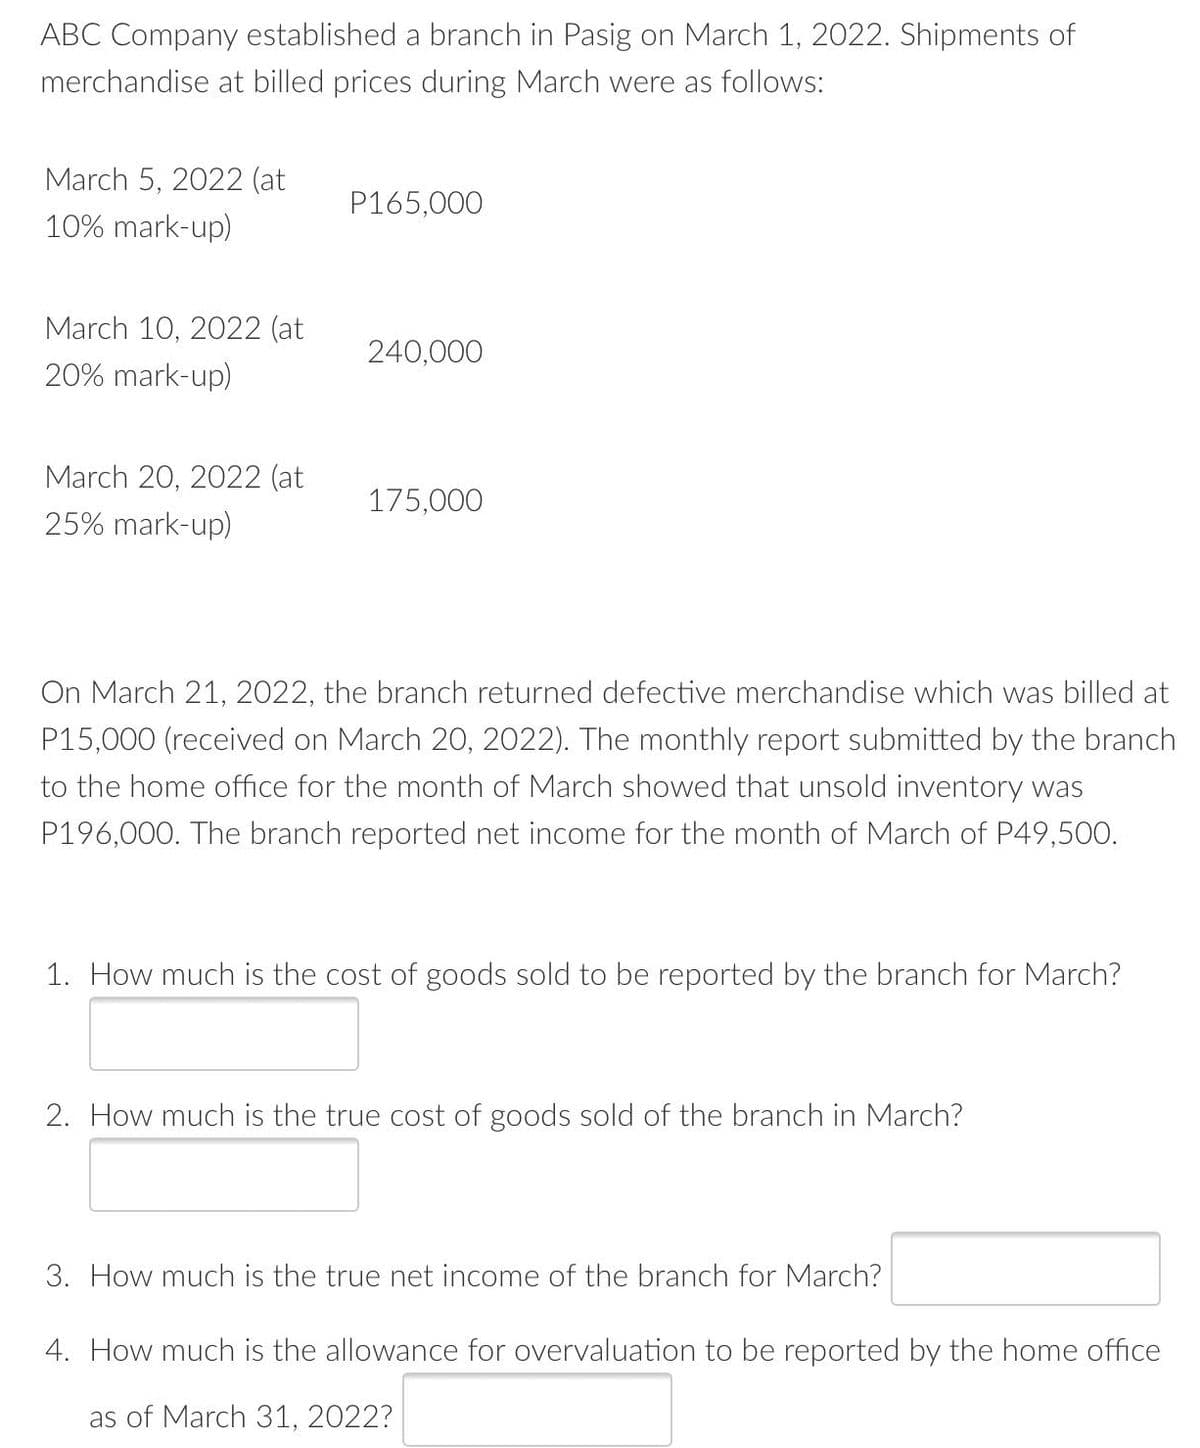 ABC Company established a branch in Pasig on March 1, 2022. Shipments of
merchandise at billed prices during March were as follows:
March 5, 2022 (at
P165,000
10% mark-up)
March 10, 2022 (at
240,000
20% mark-up)
March 20, 2022 (at
175,000
25% mark-up)
On March 21, 2022, the branch returned defective merchandise which was billed at
P15,000 (received on March 20, 2022). The monthly report submitted by the branch
to the home office for the month of March showed that unsold inventory was
P196,000. The branch reported net income for the month of March of P49,500.
1. How much is the cost of goods sold to be reported by the branch for March?
2. How much is the true cost of goods sold of the branch in March?
3. How much is the true net income of the branch for March?
4. How much is the allowance for overvaluation to be reported by the home office
as of March 31, 2022?
